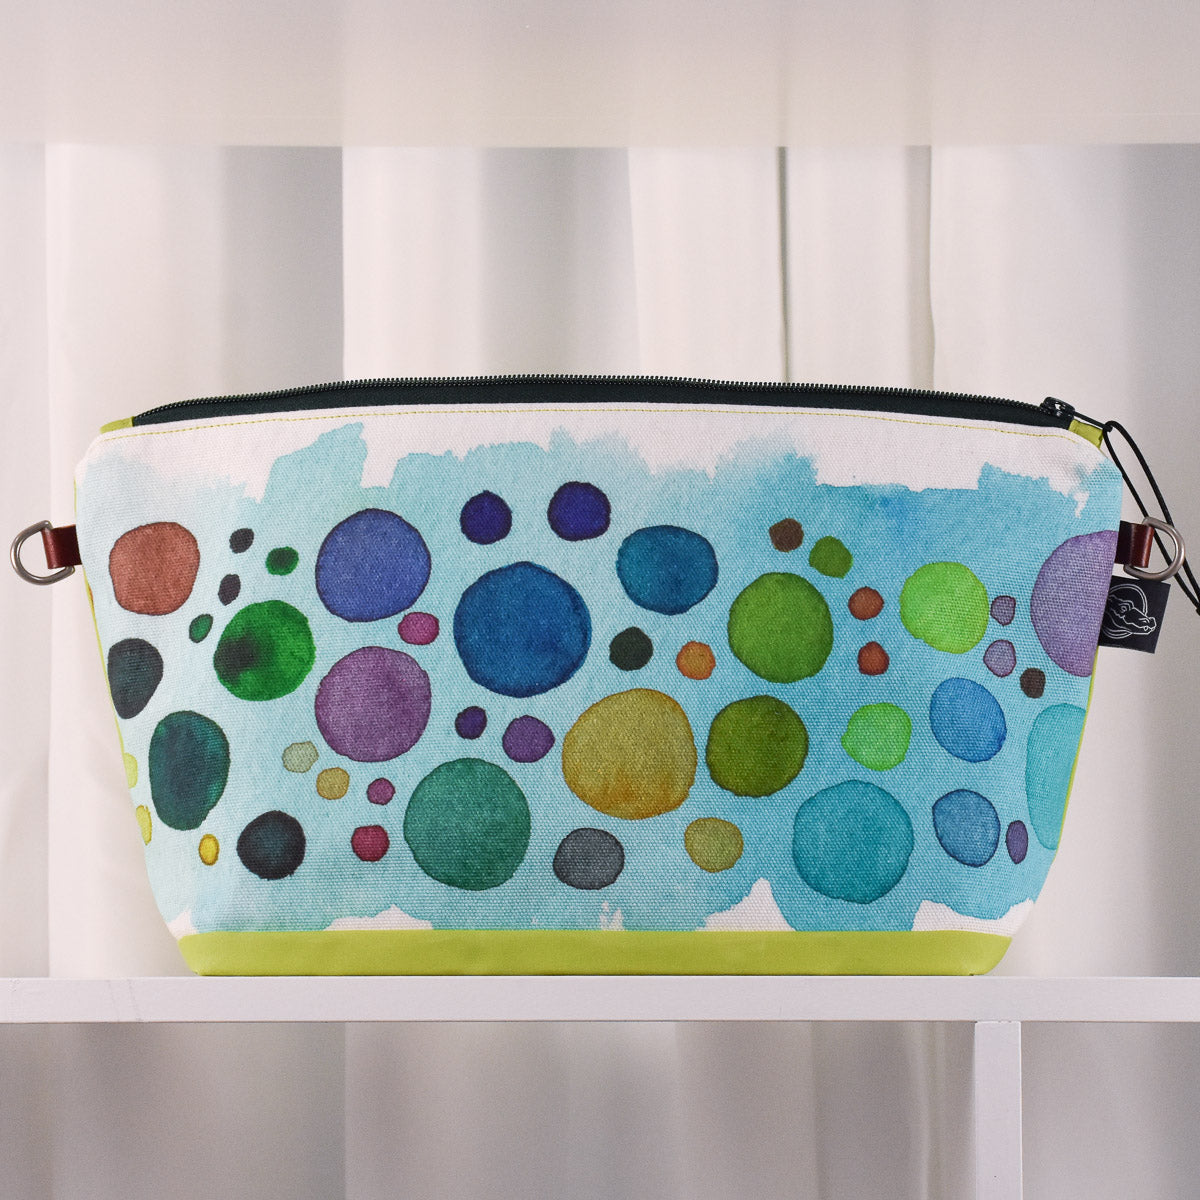 Kiwi with Turquoise Bubbles Bag No. 5 - The Large Zip Project Bag